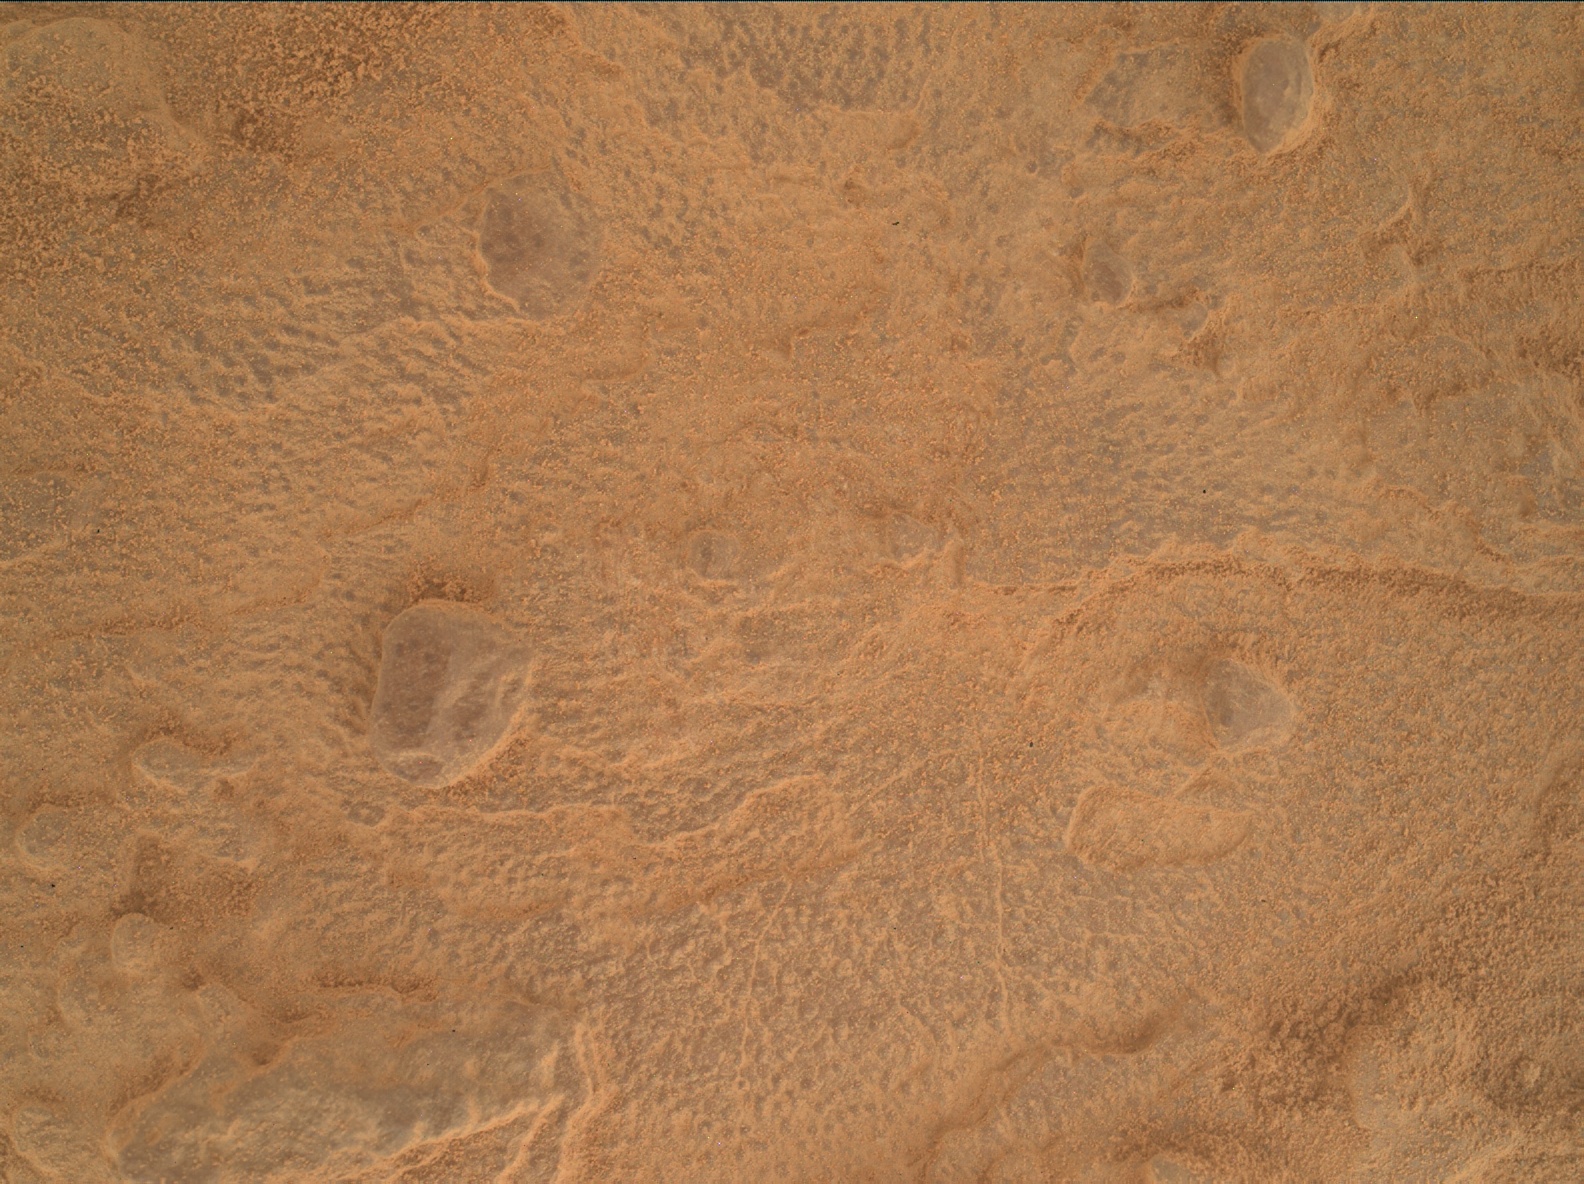 Nasa's Mars rover Curiosity acquired this image using its Mars Hand Lens Imager (MAHLI) on Sol 3601